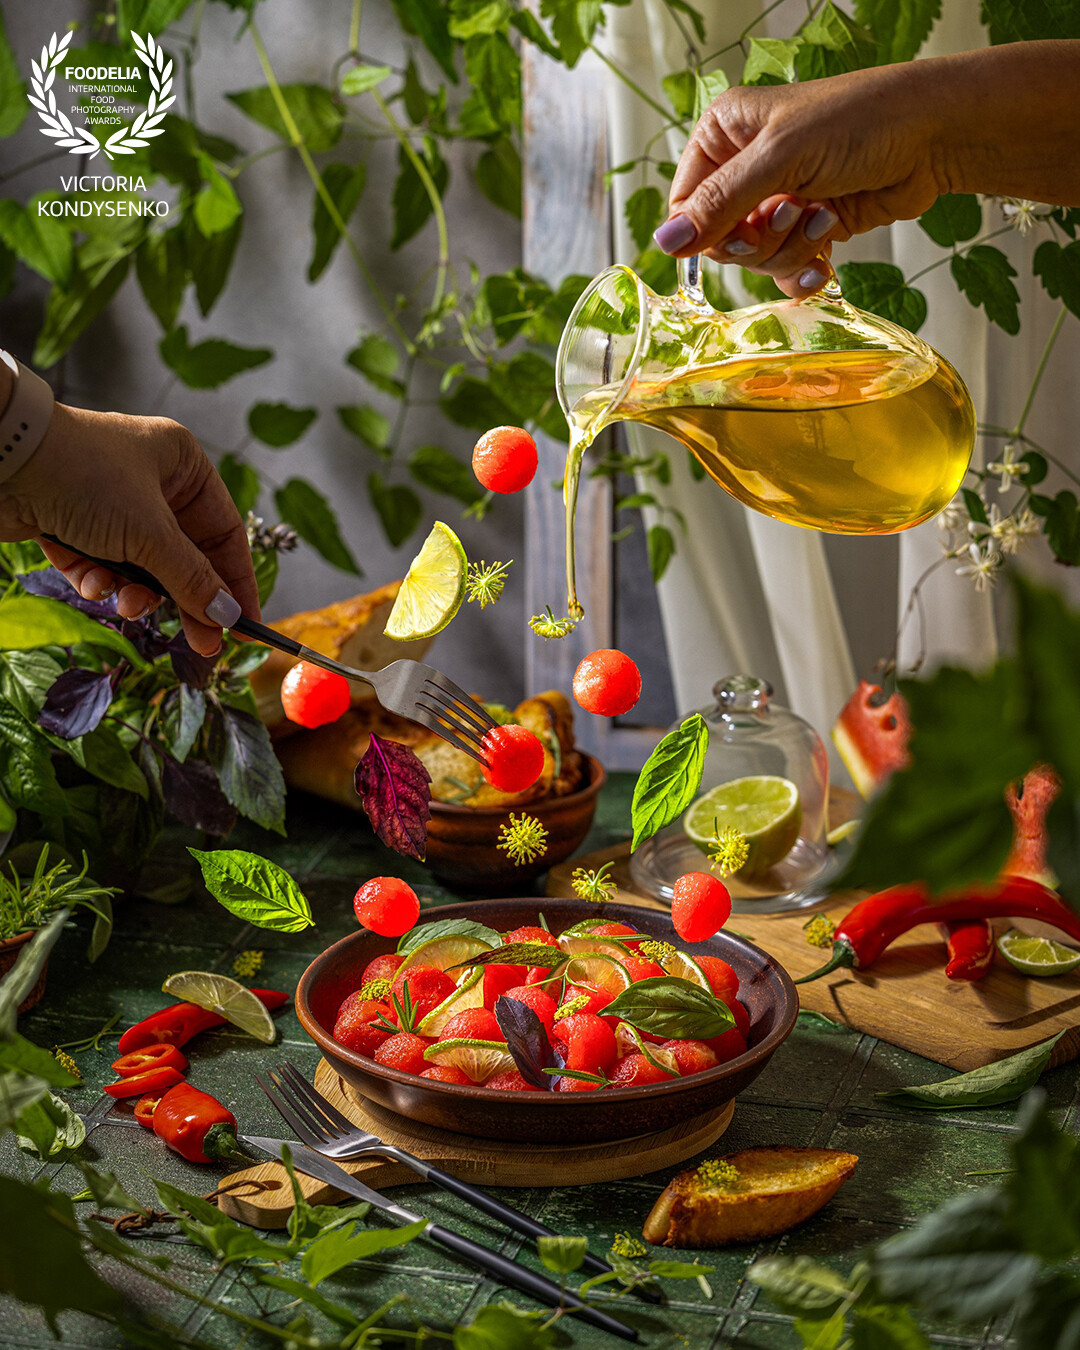 Spicy salad of fresh watermelon balls with basil, lime, rosemary and fennel, topping with olive oil. Promotional photo shoot of the local Ukrainian family cafe. Fly and splash food.